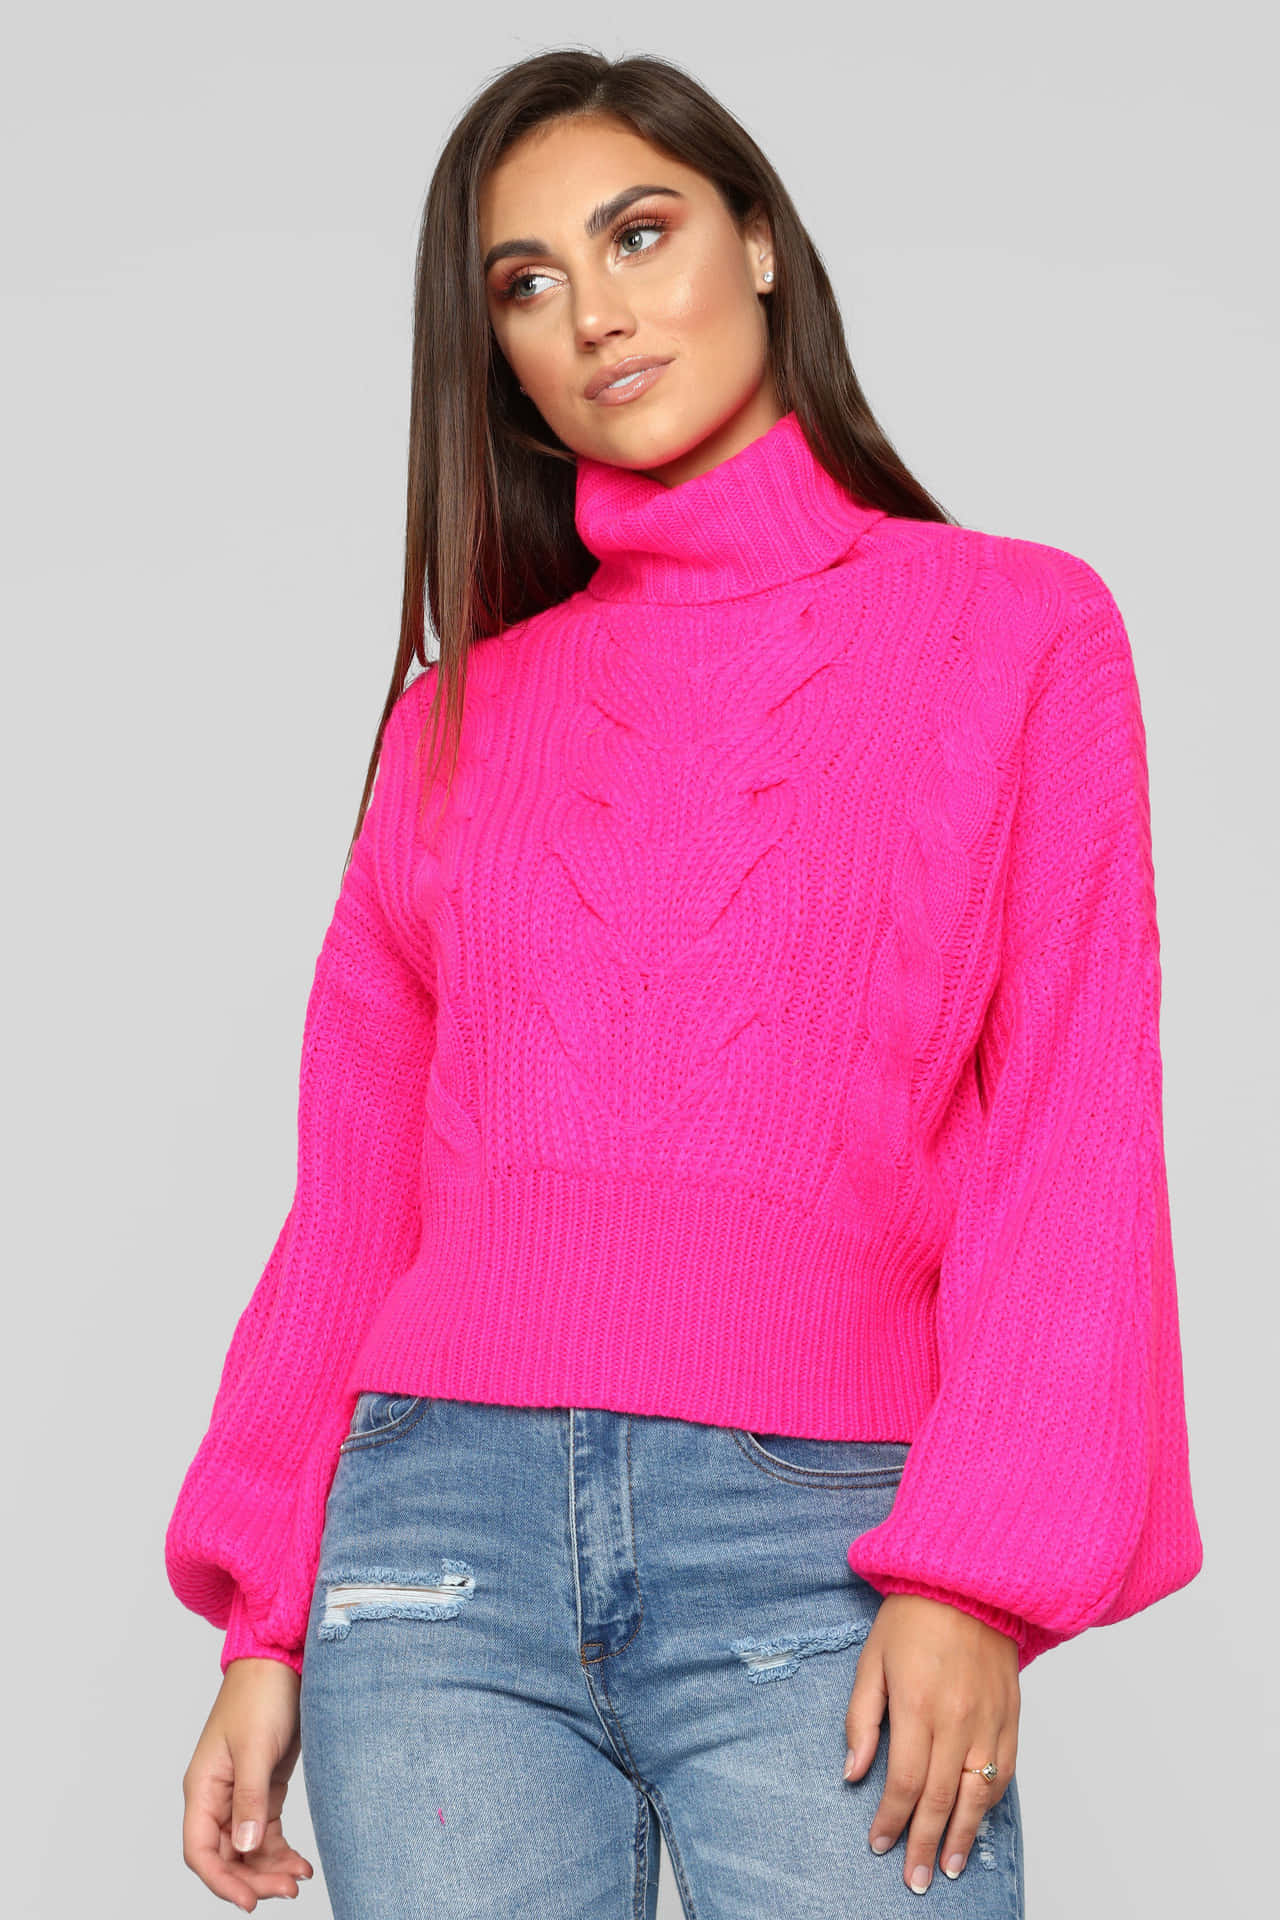 Download Stylish Woman Wearing a Cozy Pink Sweater Wallpaper ...